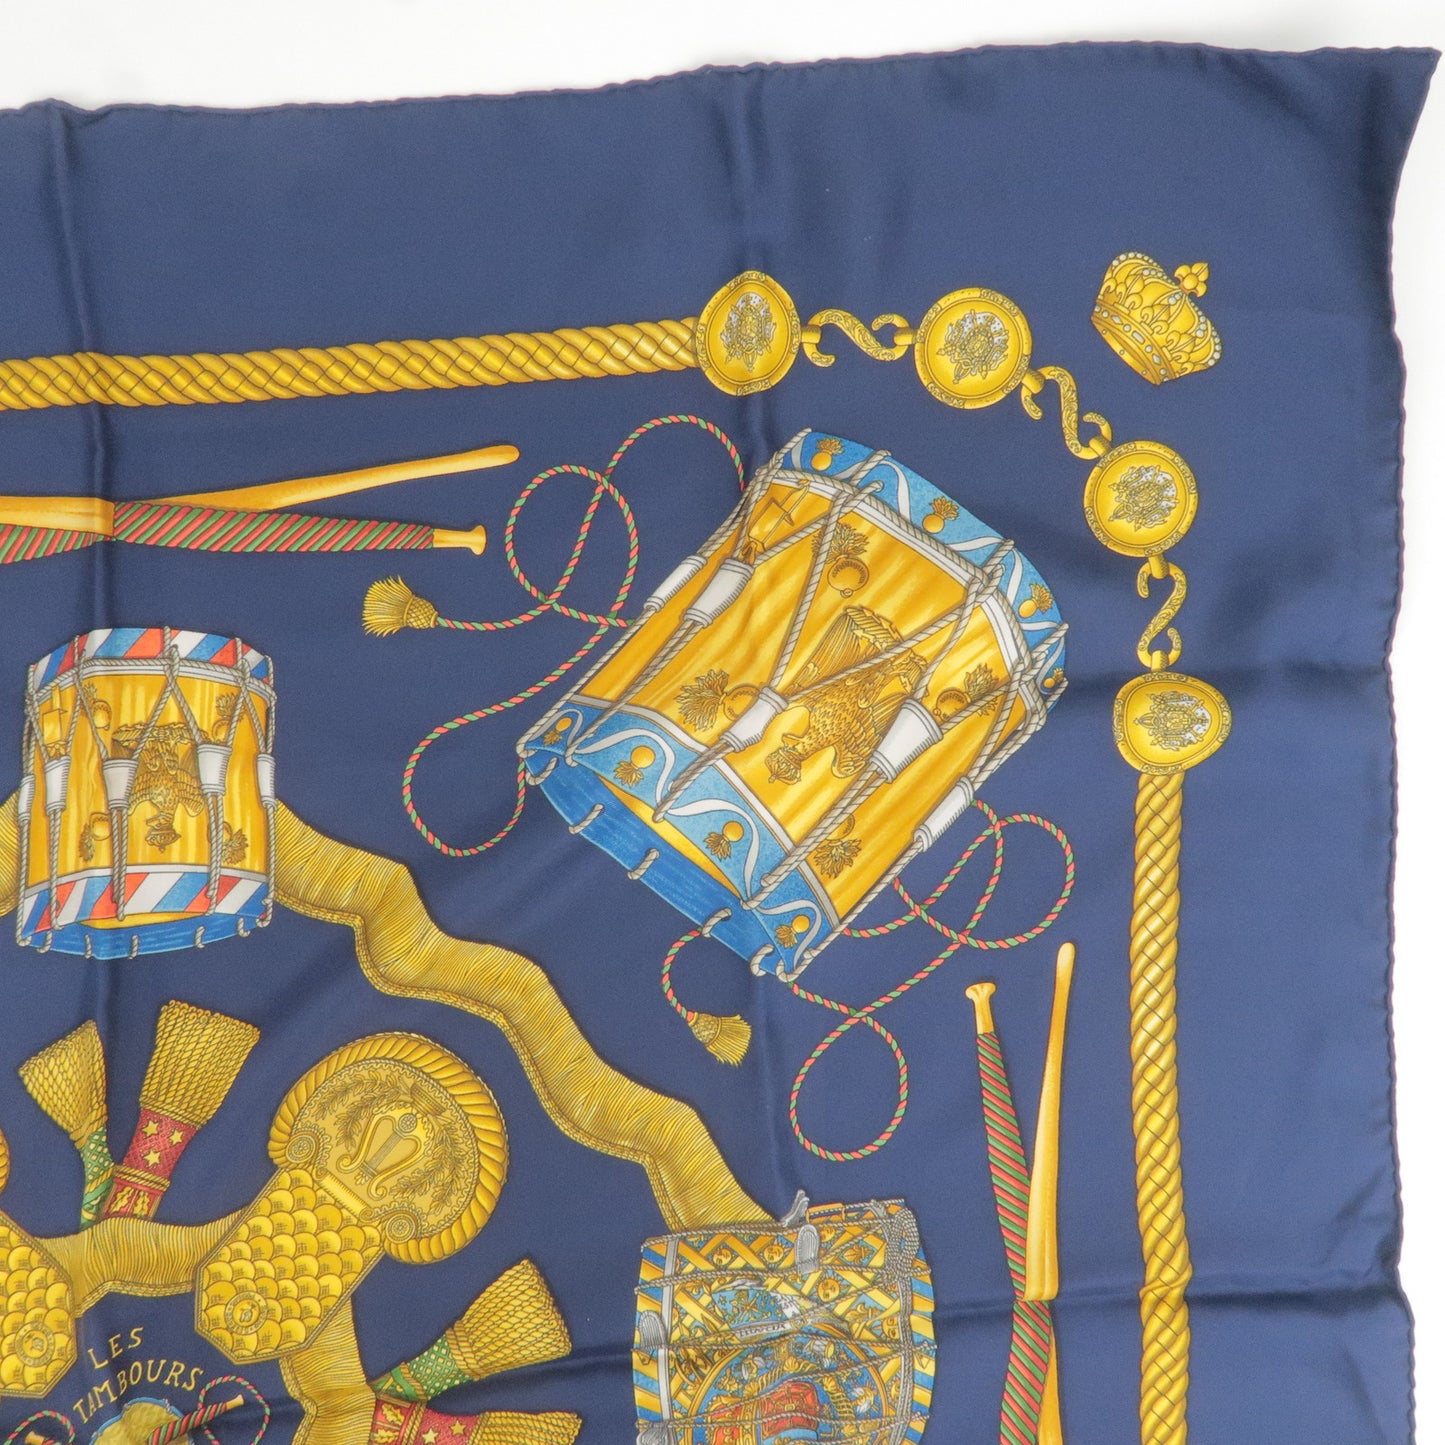 HERMES Carre 90 100% Silk Scarf Les Tambours Navy Gold